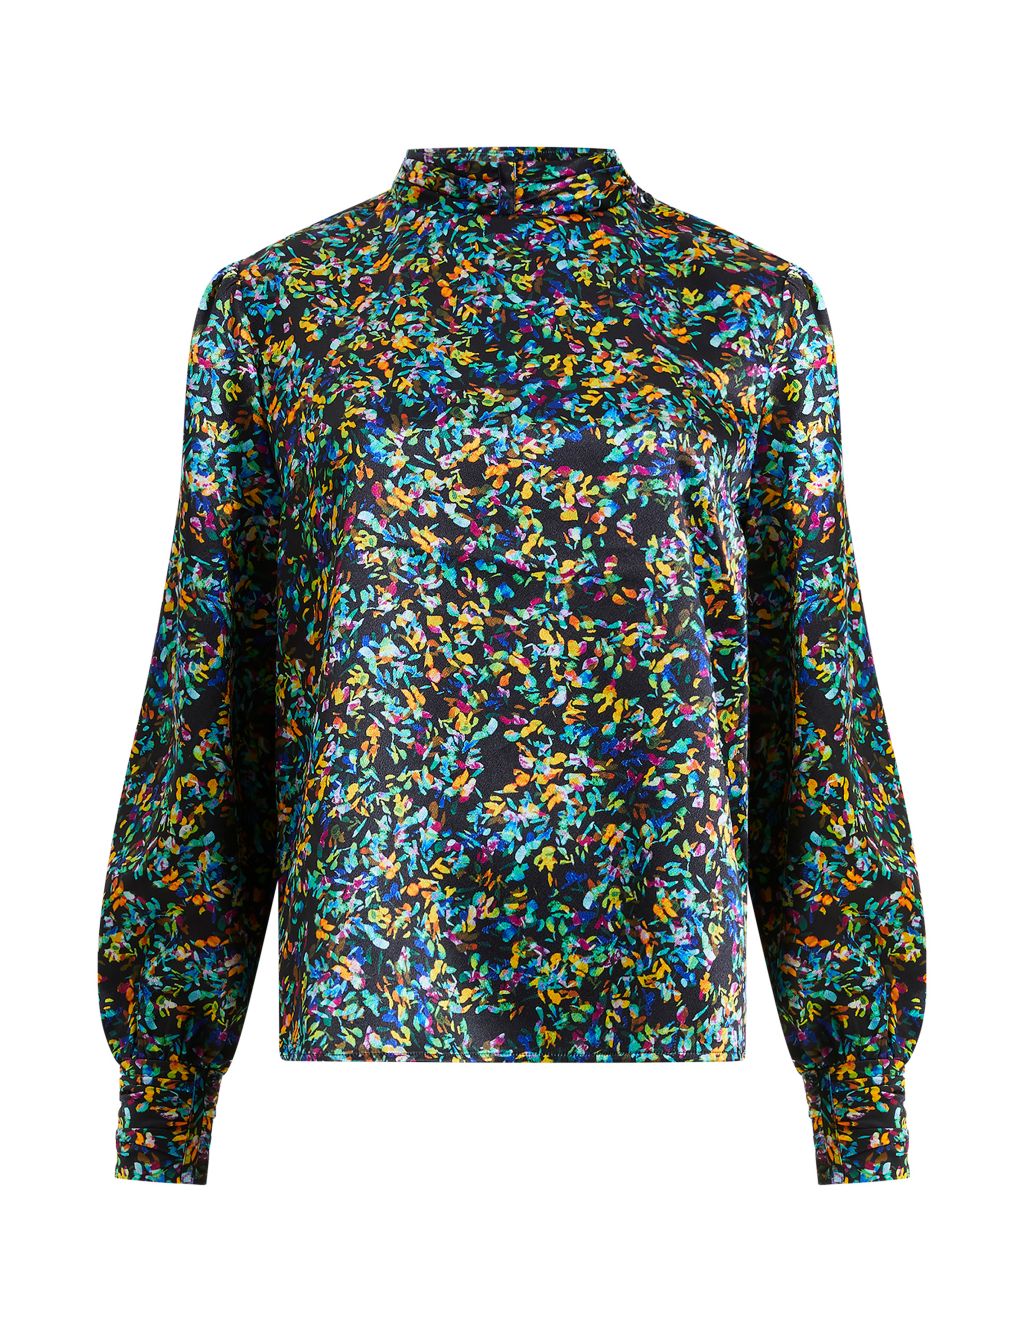 Satin Floral High Neck Top | French Connection | M&S